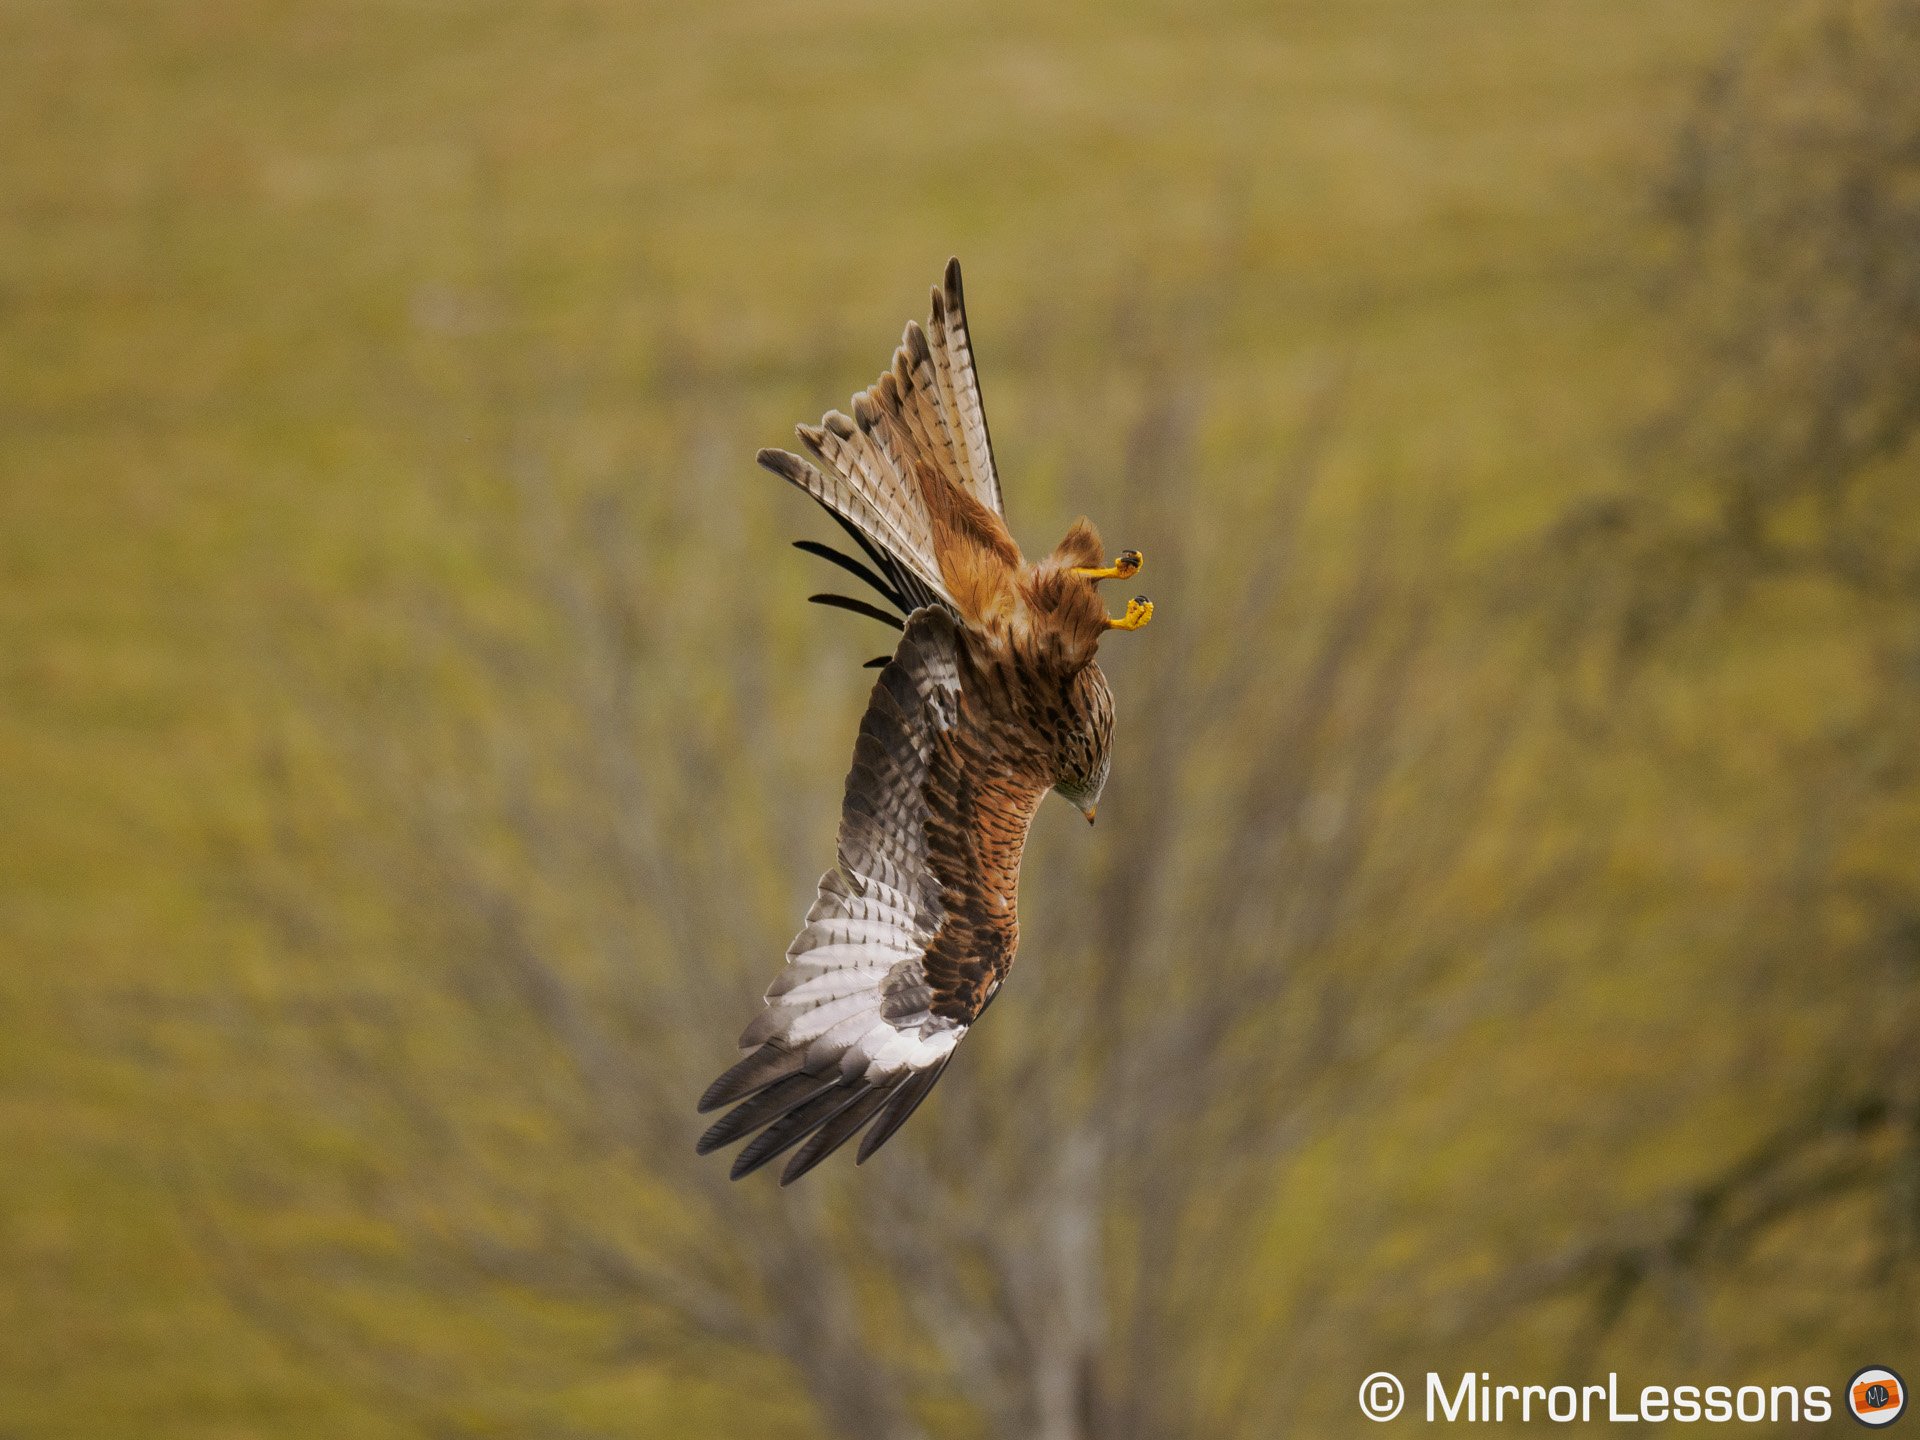 red kite diving down